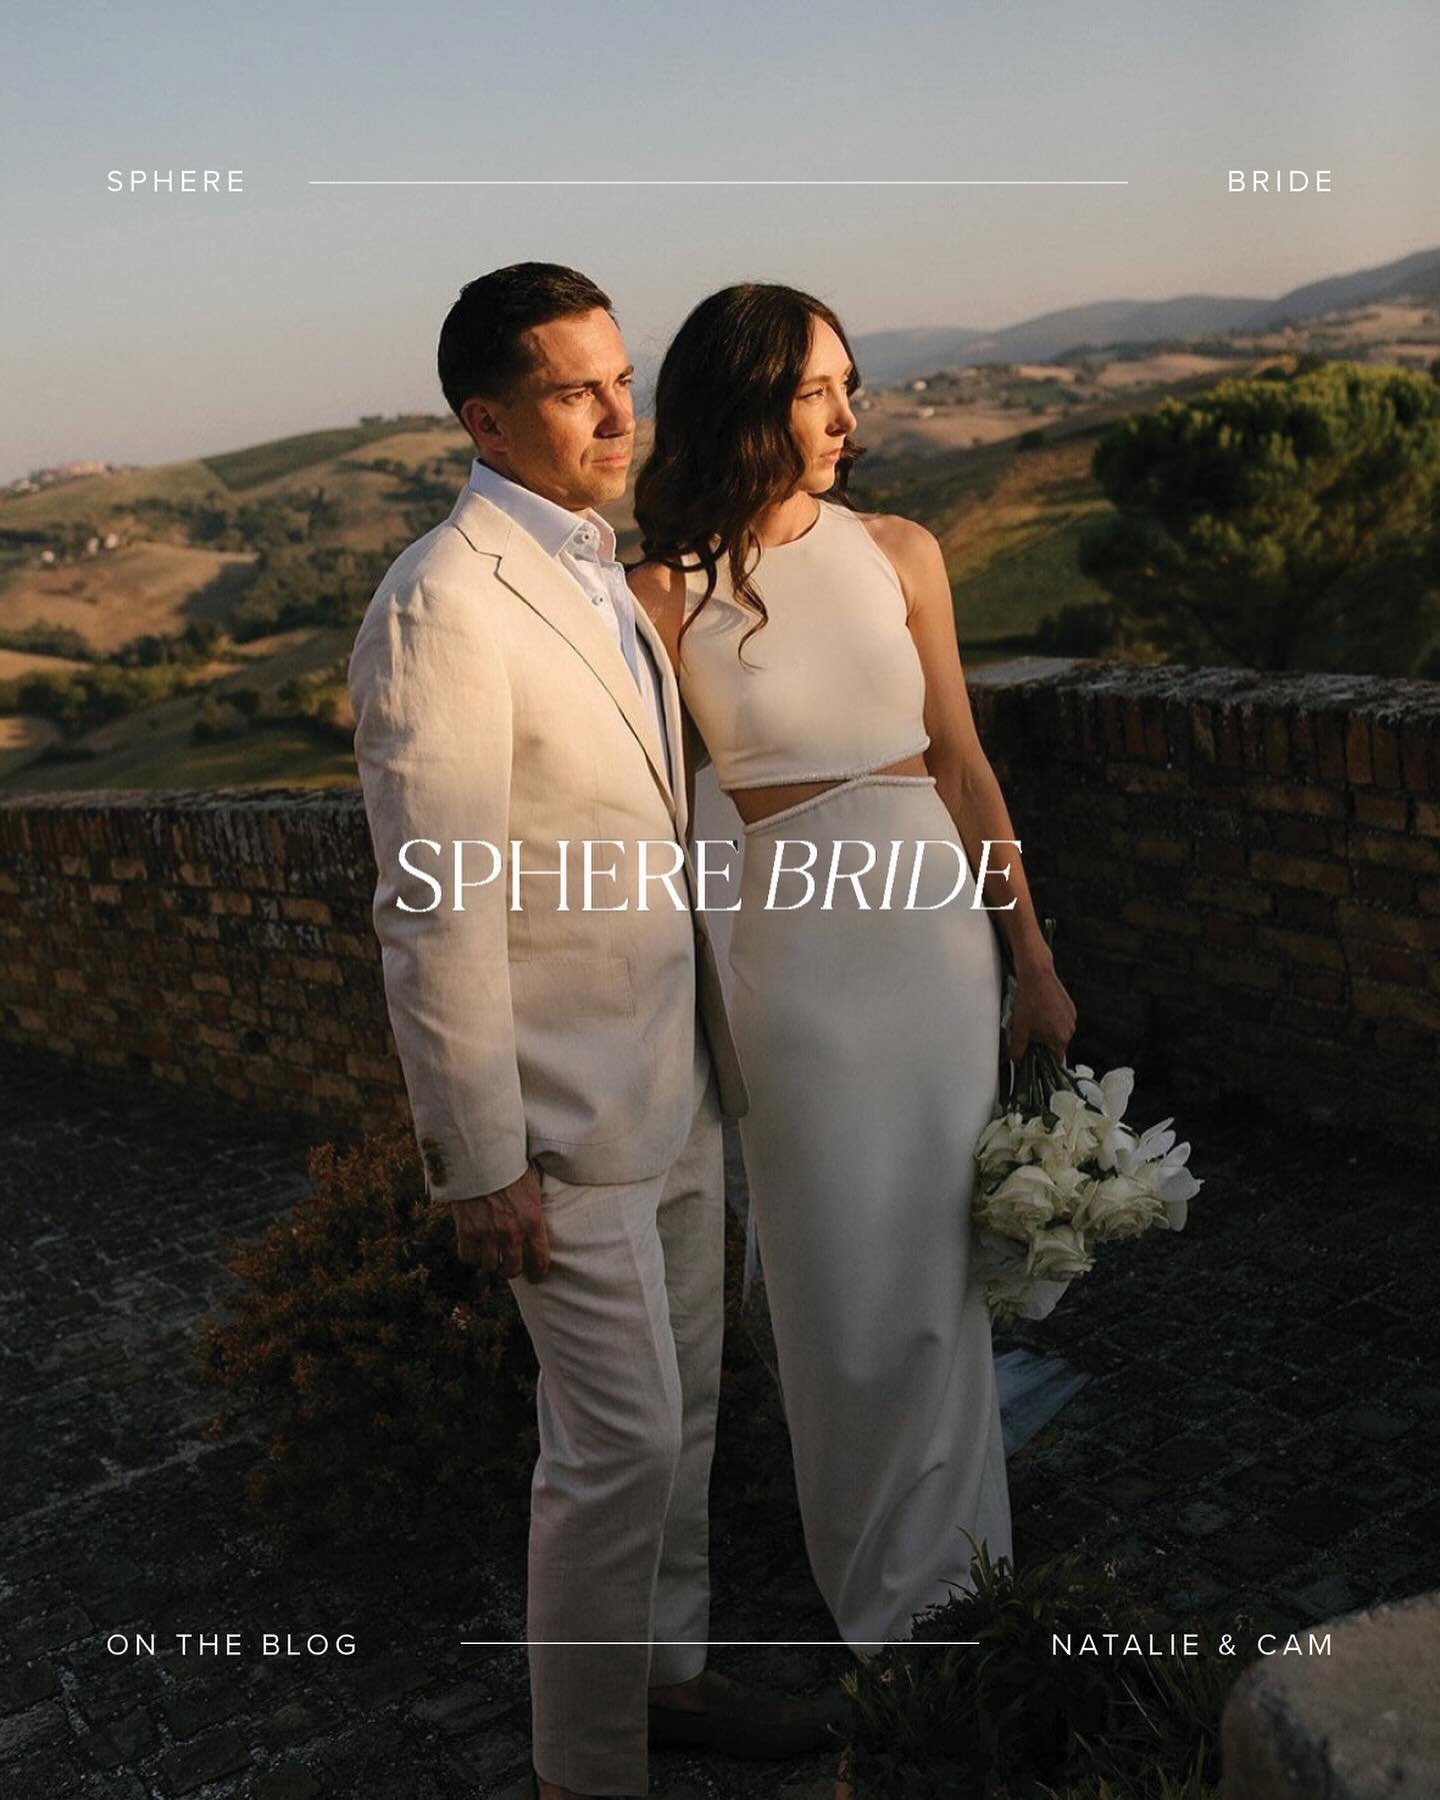 ON THE BLOG &mdash;&mdash; Poetically intimate nuptials amongst an ancient Italian village with bride Natalie in the ever chic @sophieetvoilabridal Glenda dress from our Sydney boutique. See the full gallery and vendor details, or book an appointment